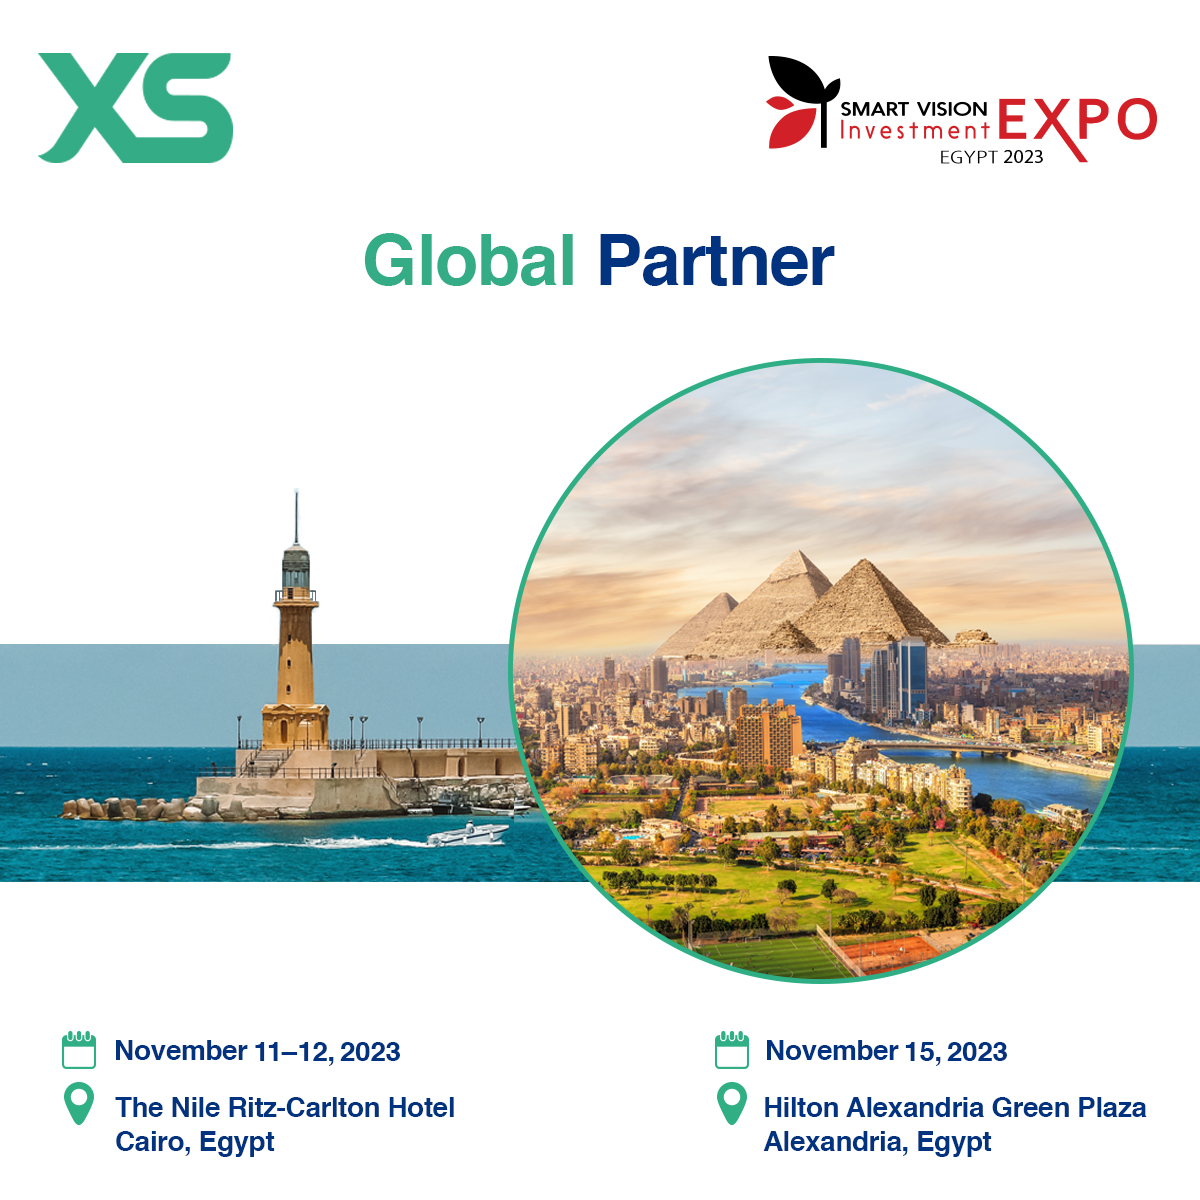 XS.com Announces Global Partner Sponsorship for Egypt's Upcoming Investment Expo Hosted by Smart Vision